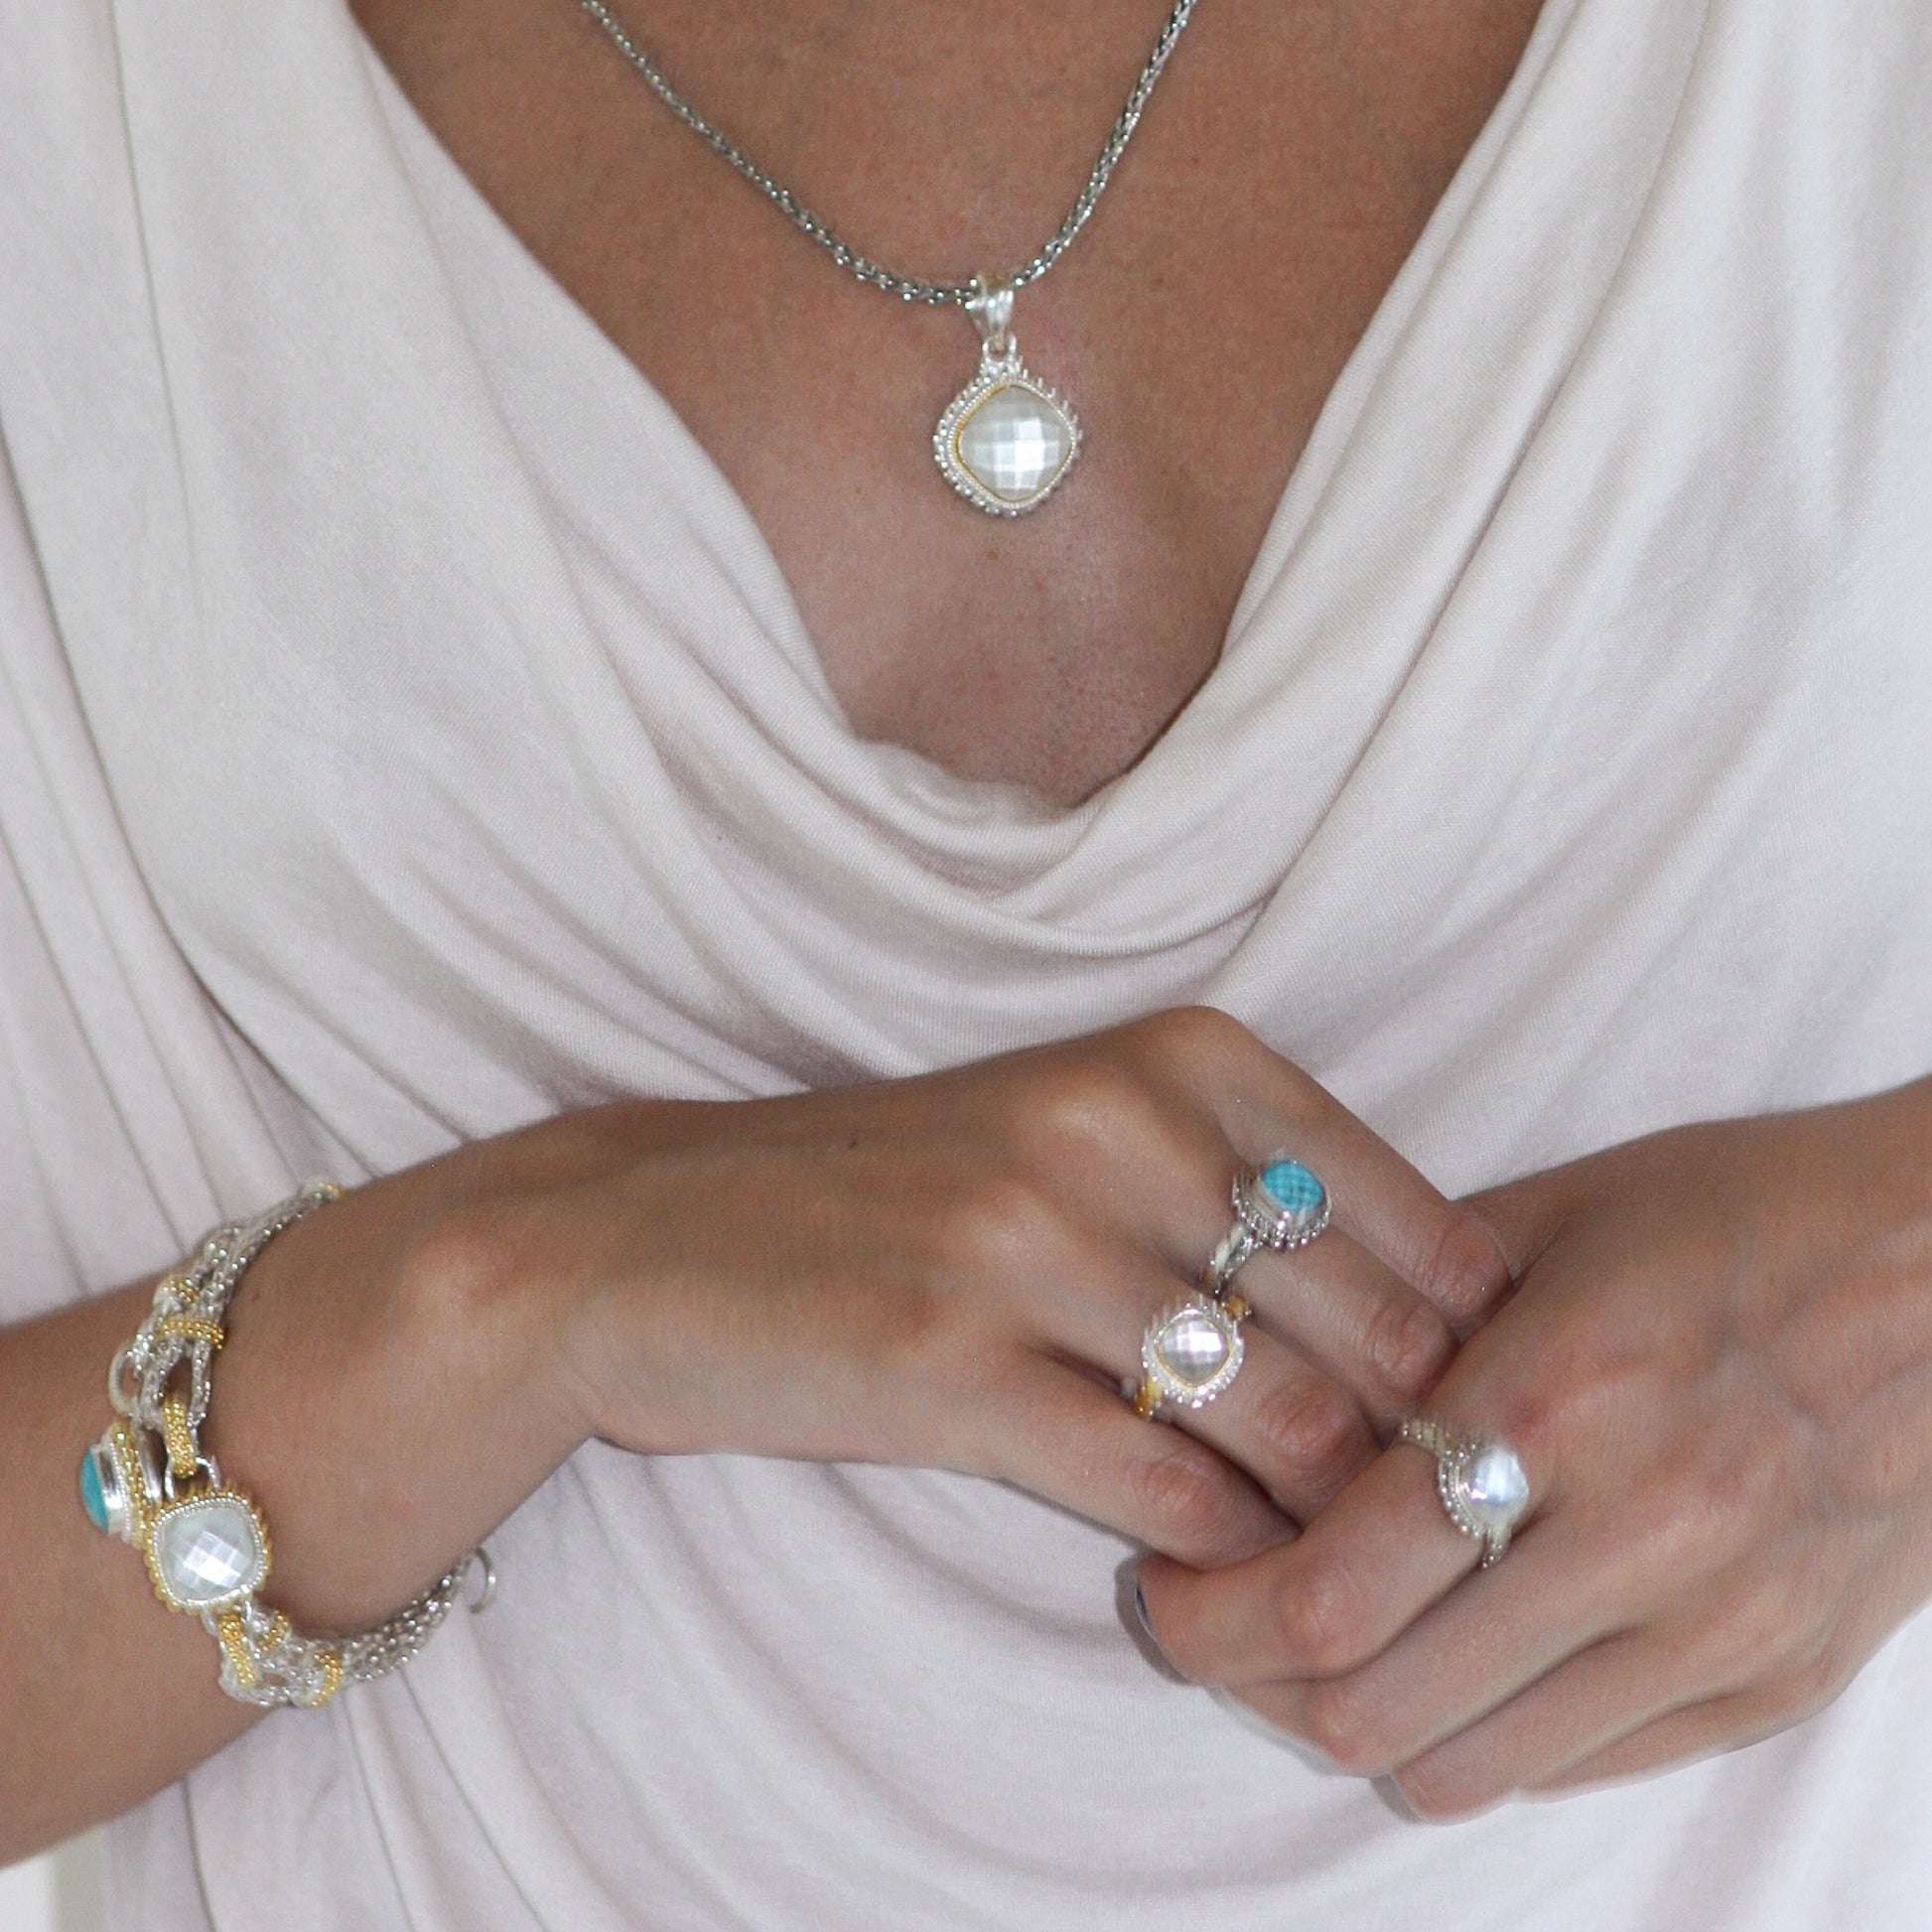 Woman wearing mother of pearl doublet bracelet, rings, and pendant.